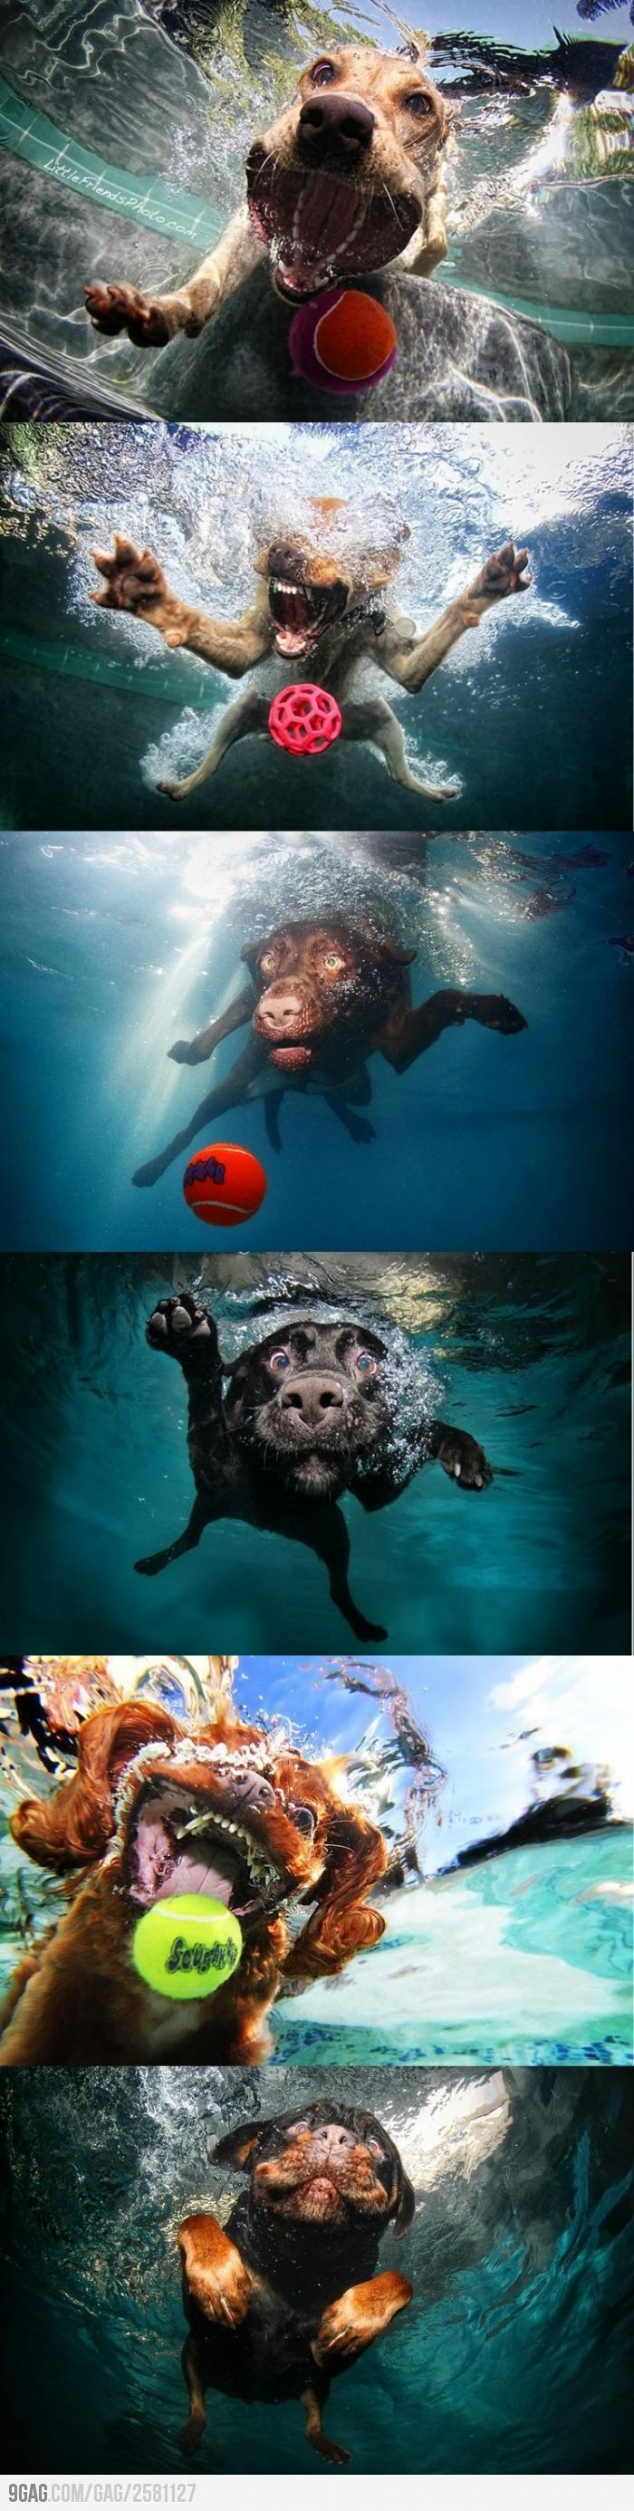 Underwater dogs are awesome!